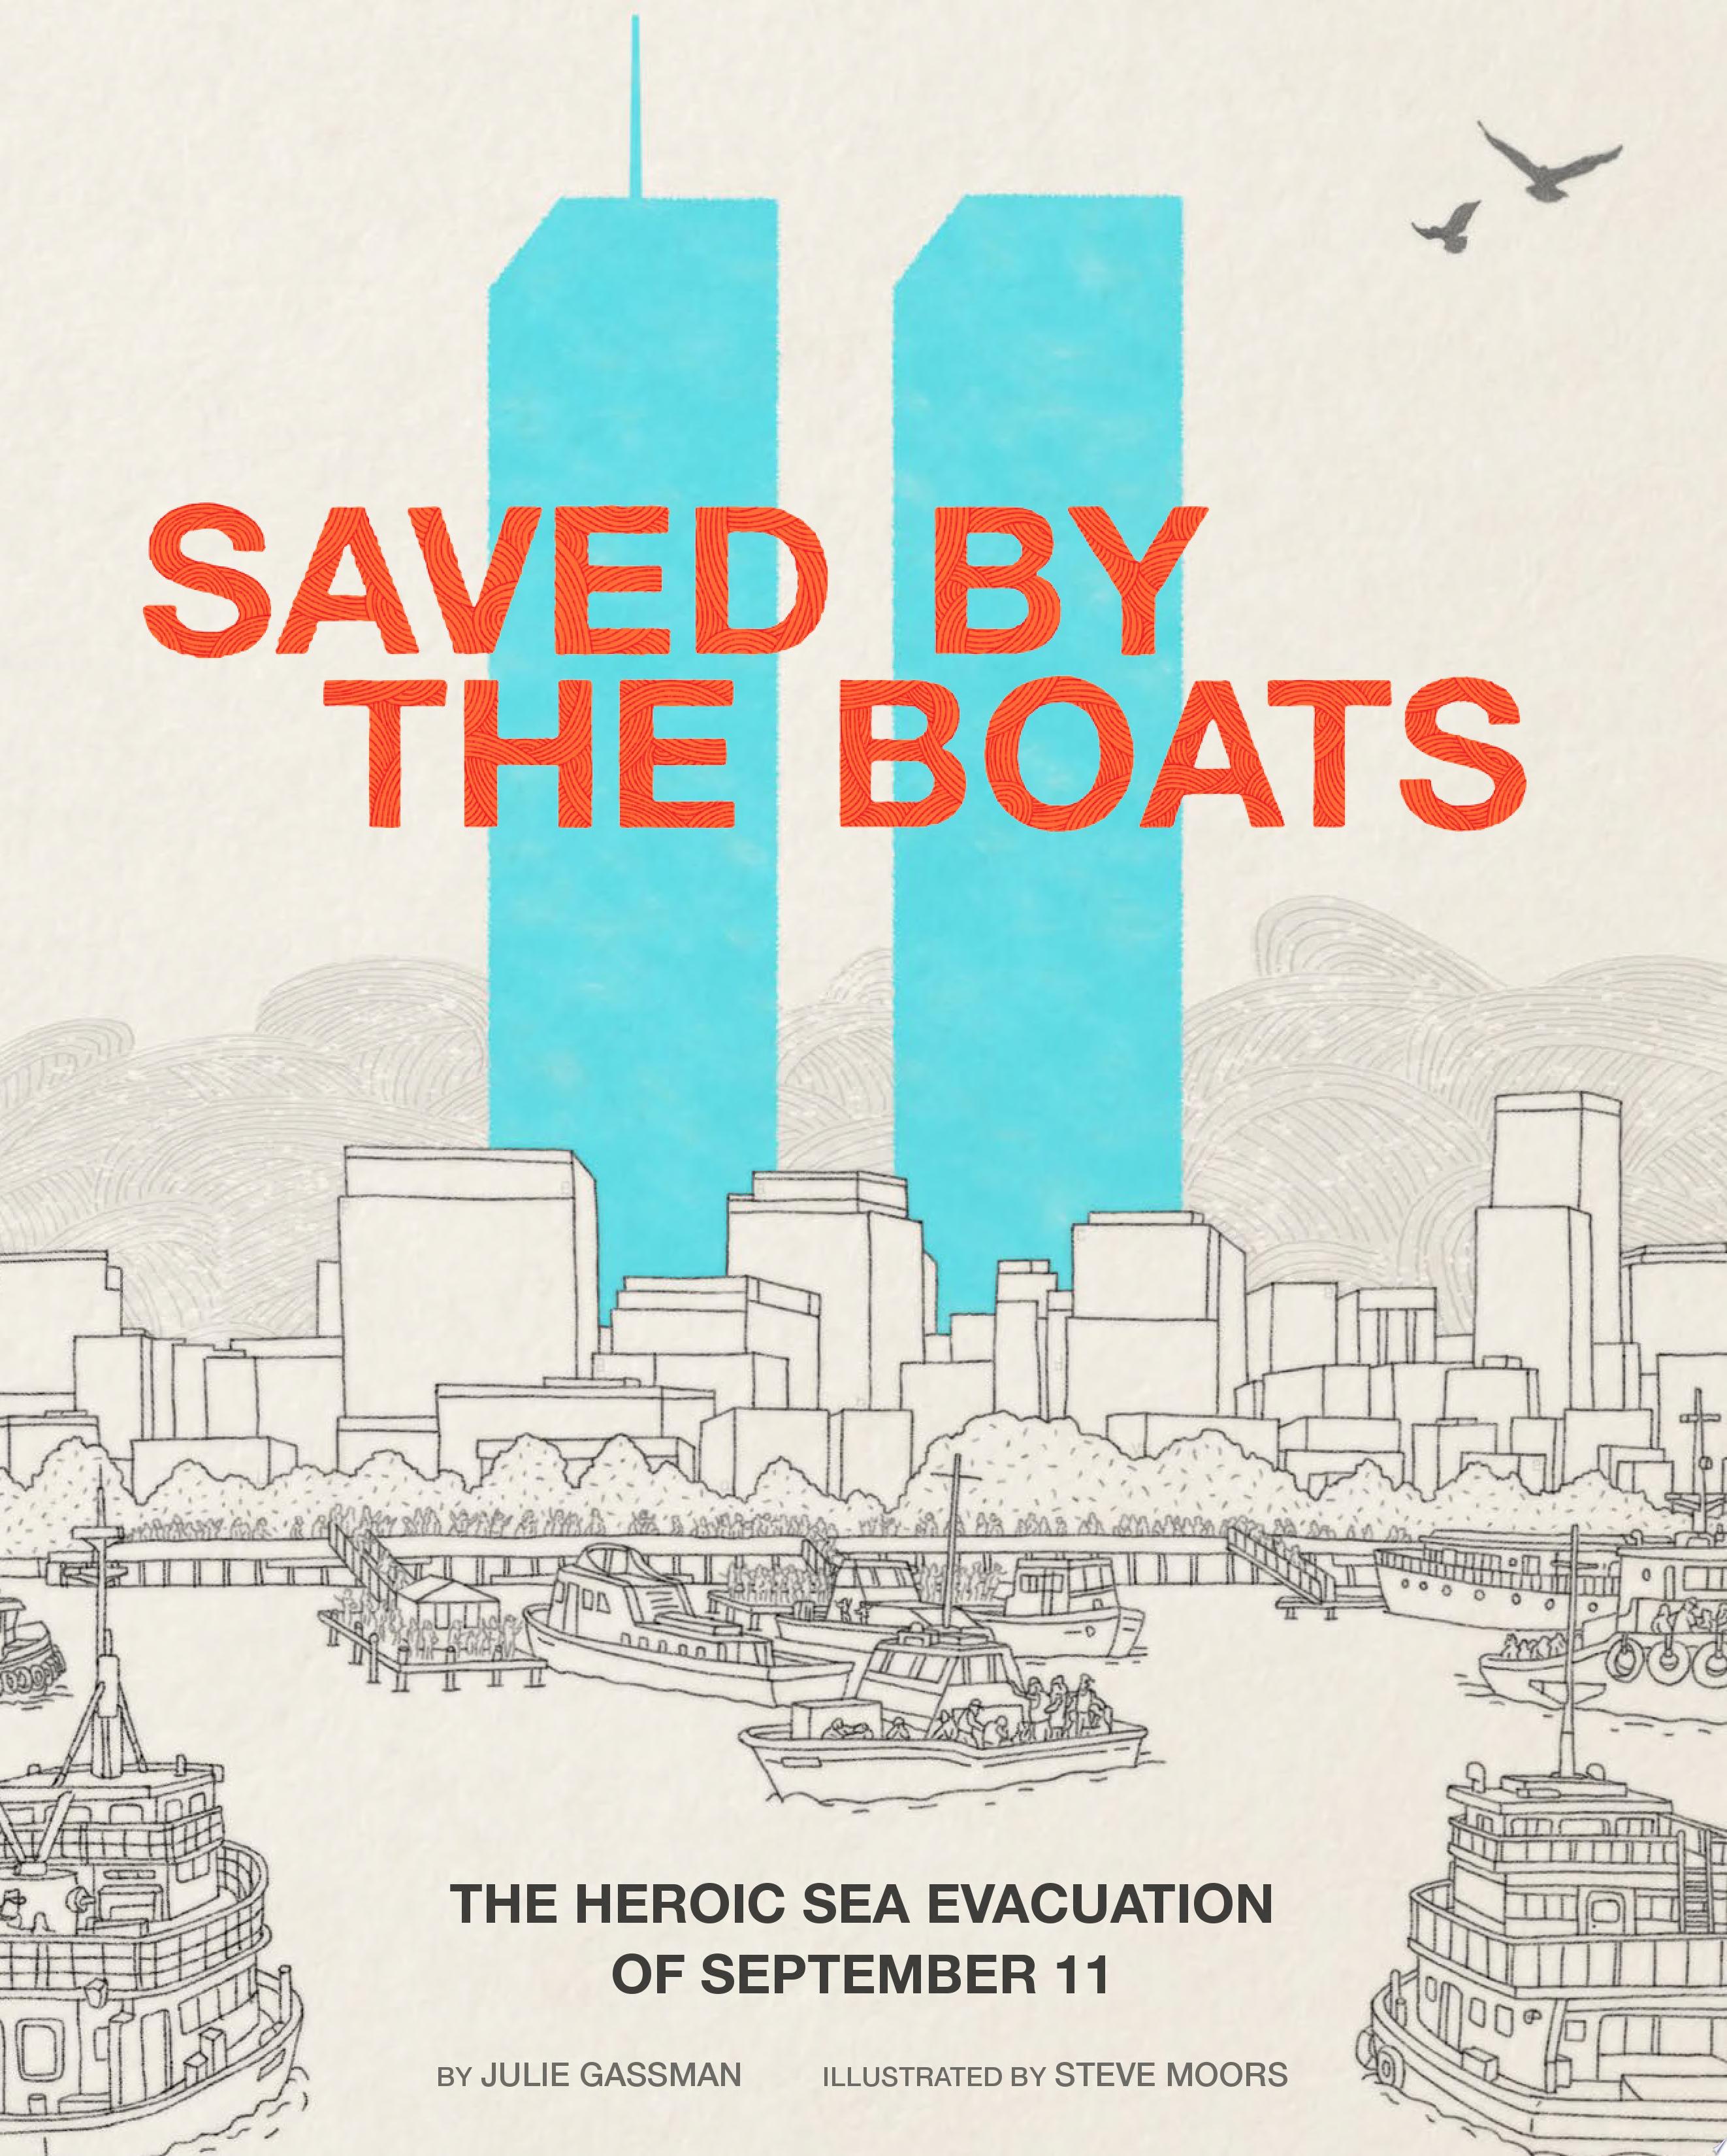 Image for "Saved by the Boats"